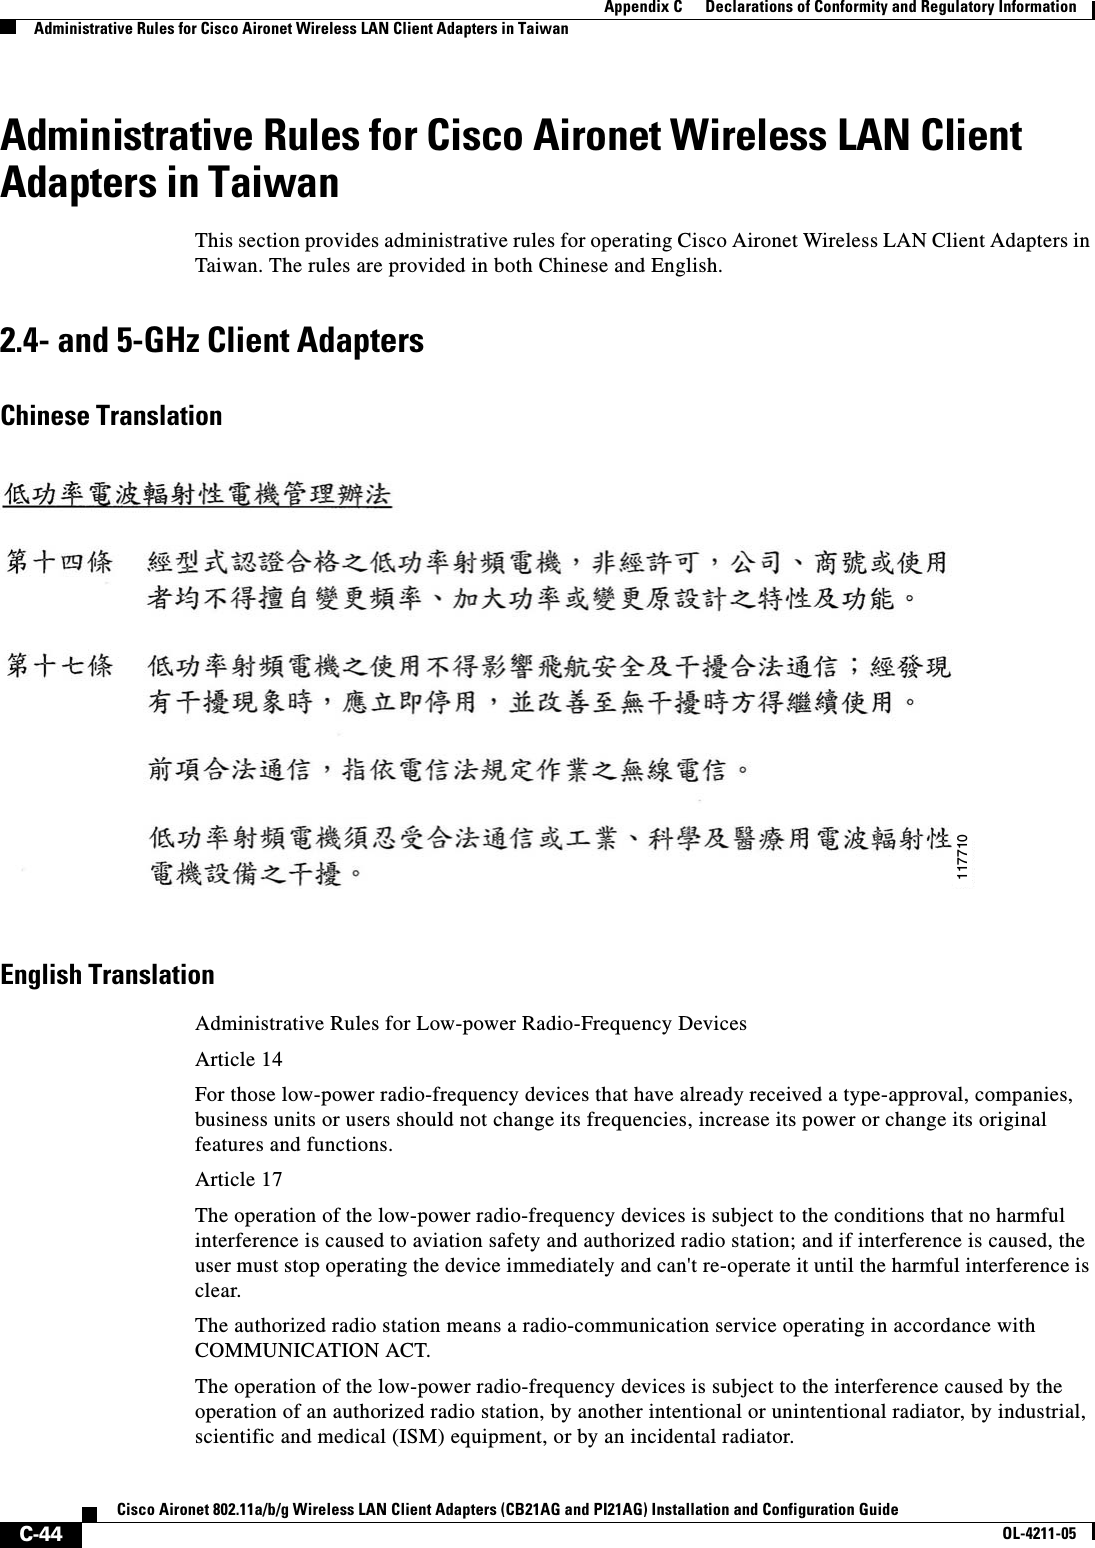 C-44Cisco Aironet 802.11a/b/g Wireless LAN Client Adapters (CB21AG and PI21AG) Installation and Configuration GuideOL-4211-05Appendix C      Declarations of Conformity and Regulatory InformationAdministrative Rules for Cisco Aironet Wireless LAN Client Adapters in TaiwanAdministrative Rules for Cisco Aironet Wireless LAN Client Adapters in TaiwanThis section provides administrative rules for operating Cisco Aironet Wireless LAN Client Adapters in Taiwan. The rules are provided in both Chinese and English.2.4- and 5-GHz Client AdaptersChinese TranslationEnglish TranslationAdministrative Rules for Low-power Radio-Frequency DevicesArticle 14For those low-power radio-frequency devices that have already received a type-approval, companies, business units or users should not change its frequencies, increase its power or change its original features and functions.Article 17The operation of the low-power radio-frequency devices is subject to the conditions that no harmful interference is caused to aviation safety and authorized radio station; and if interference is caused, the user must stop operating the device immediately and can&apos;t re-operate it until the harmful interference is clear.The authorized radio station means a radio-communication service operating in accordance with COMMUNICATION ACT. The operation of the low-power radio-frequency devices is subject to the interference caused by the operation of an authorized radio station, by another intentional or unintentional radiator, by industrial, scientific and medical (ISM) equipment, or by an incidental radiator.117710